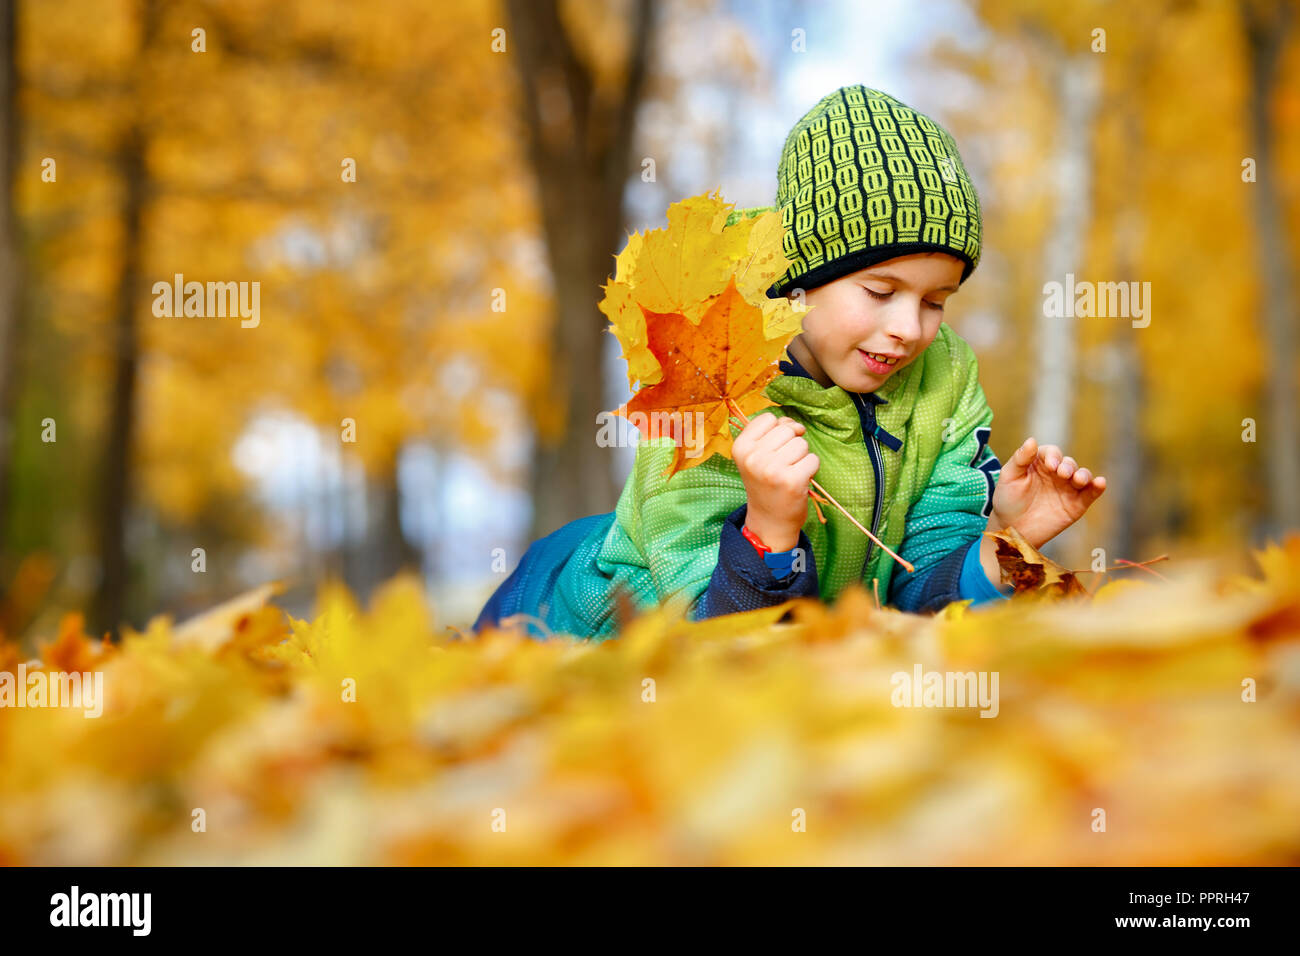 Cheerful little boy lying on the ground in fallen leaves Stock Photo